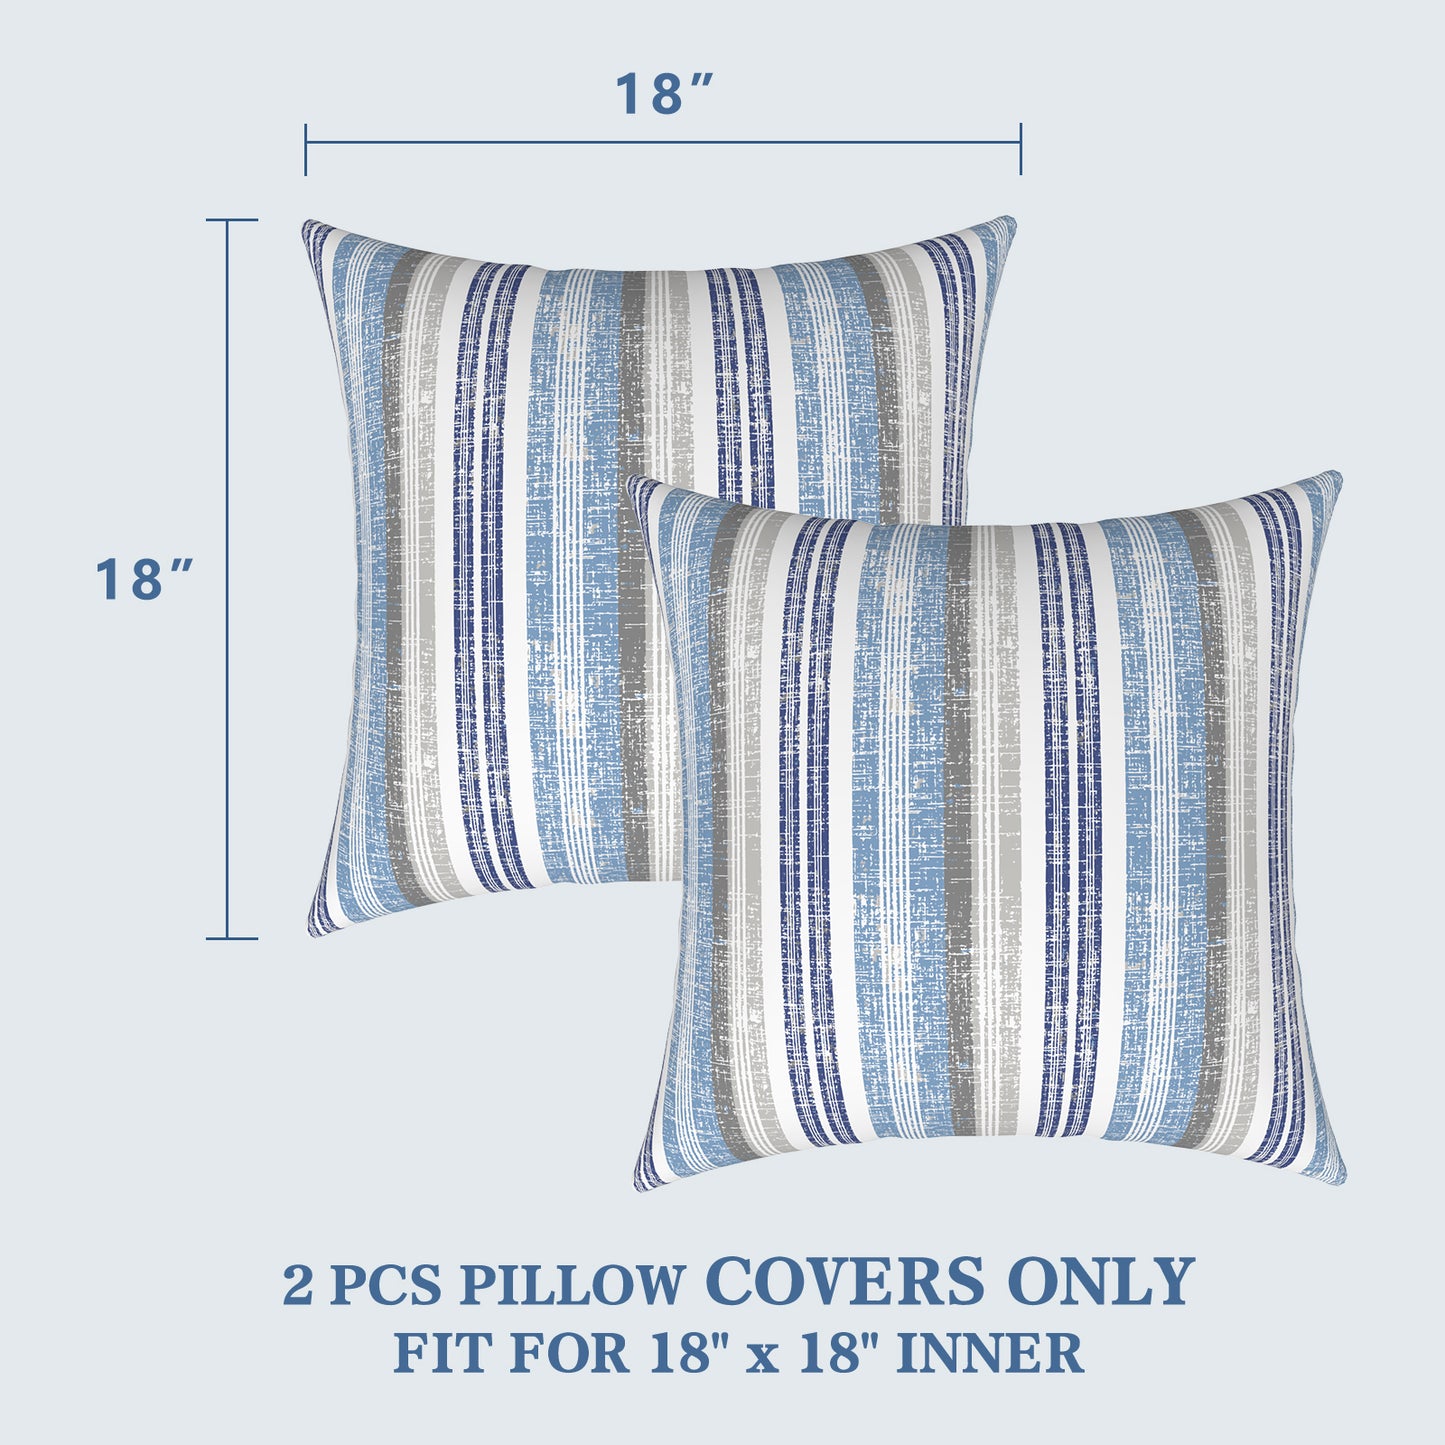 Melody Elephant Outdoor Throw Pillow Covers Pack of 2, Decorative Water Repellent Square Pillow Cases 18x18 Inch, Patio Pillowcases for Home Patio Furniture Use, Stripe Layered Blue